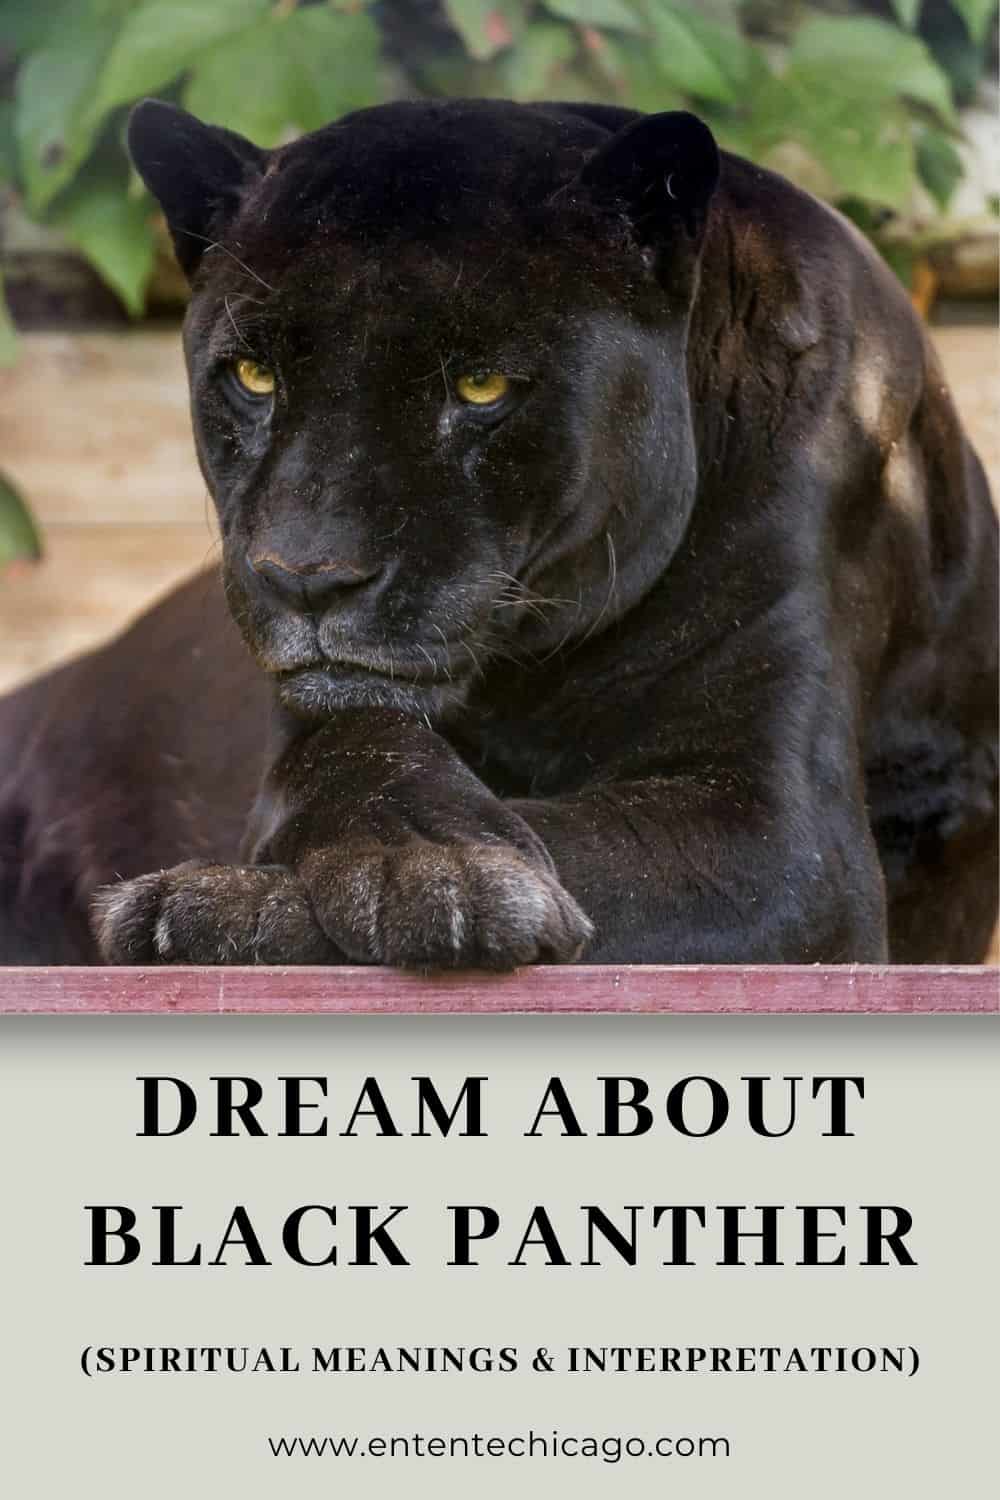 What does it mean when you dream about a black panther?